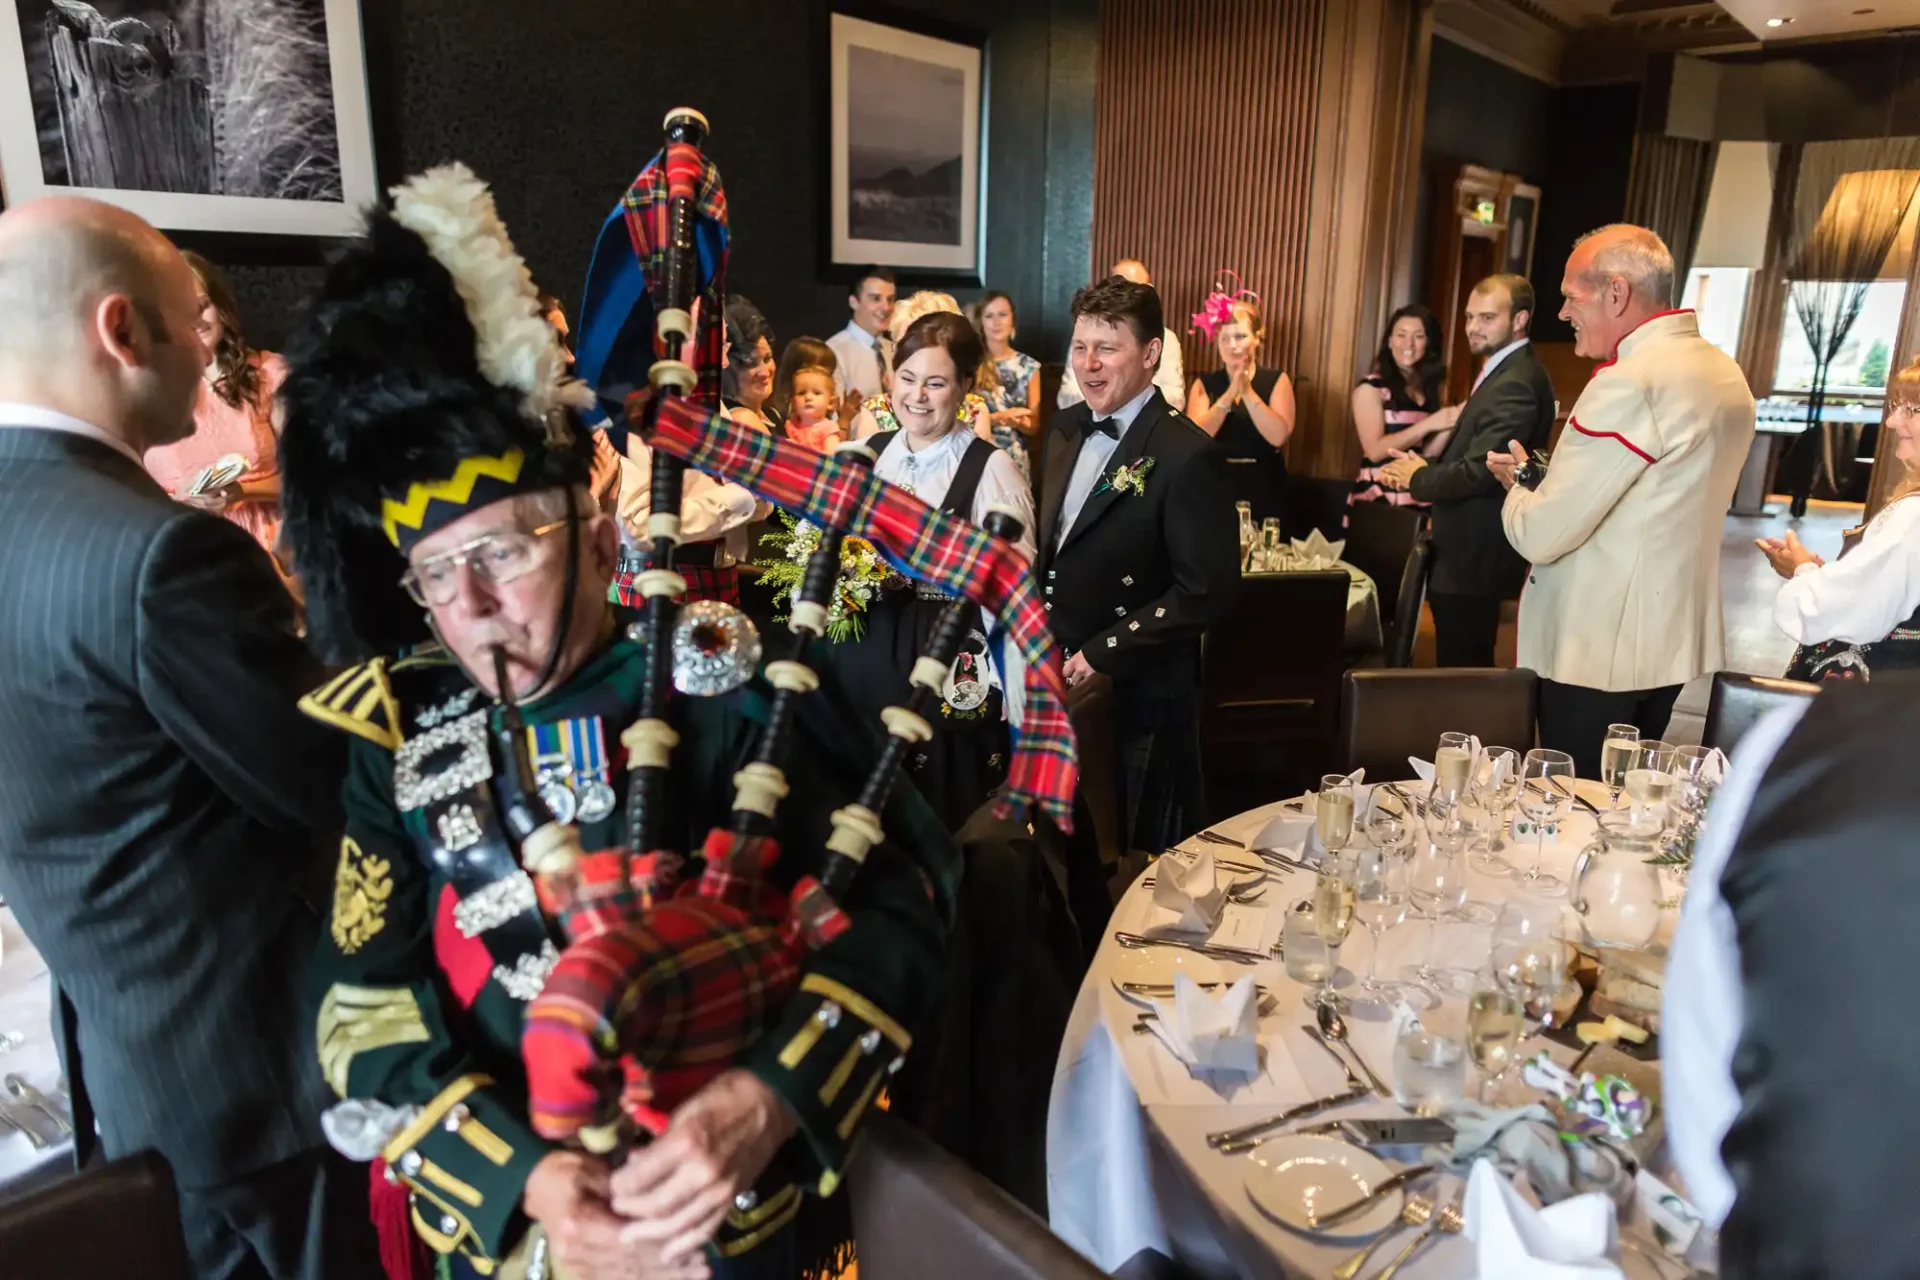 A bride and groom follow a bagpiper in traditional scottish attire through a festively decorated dining room at their wedding reception.